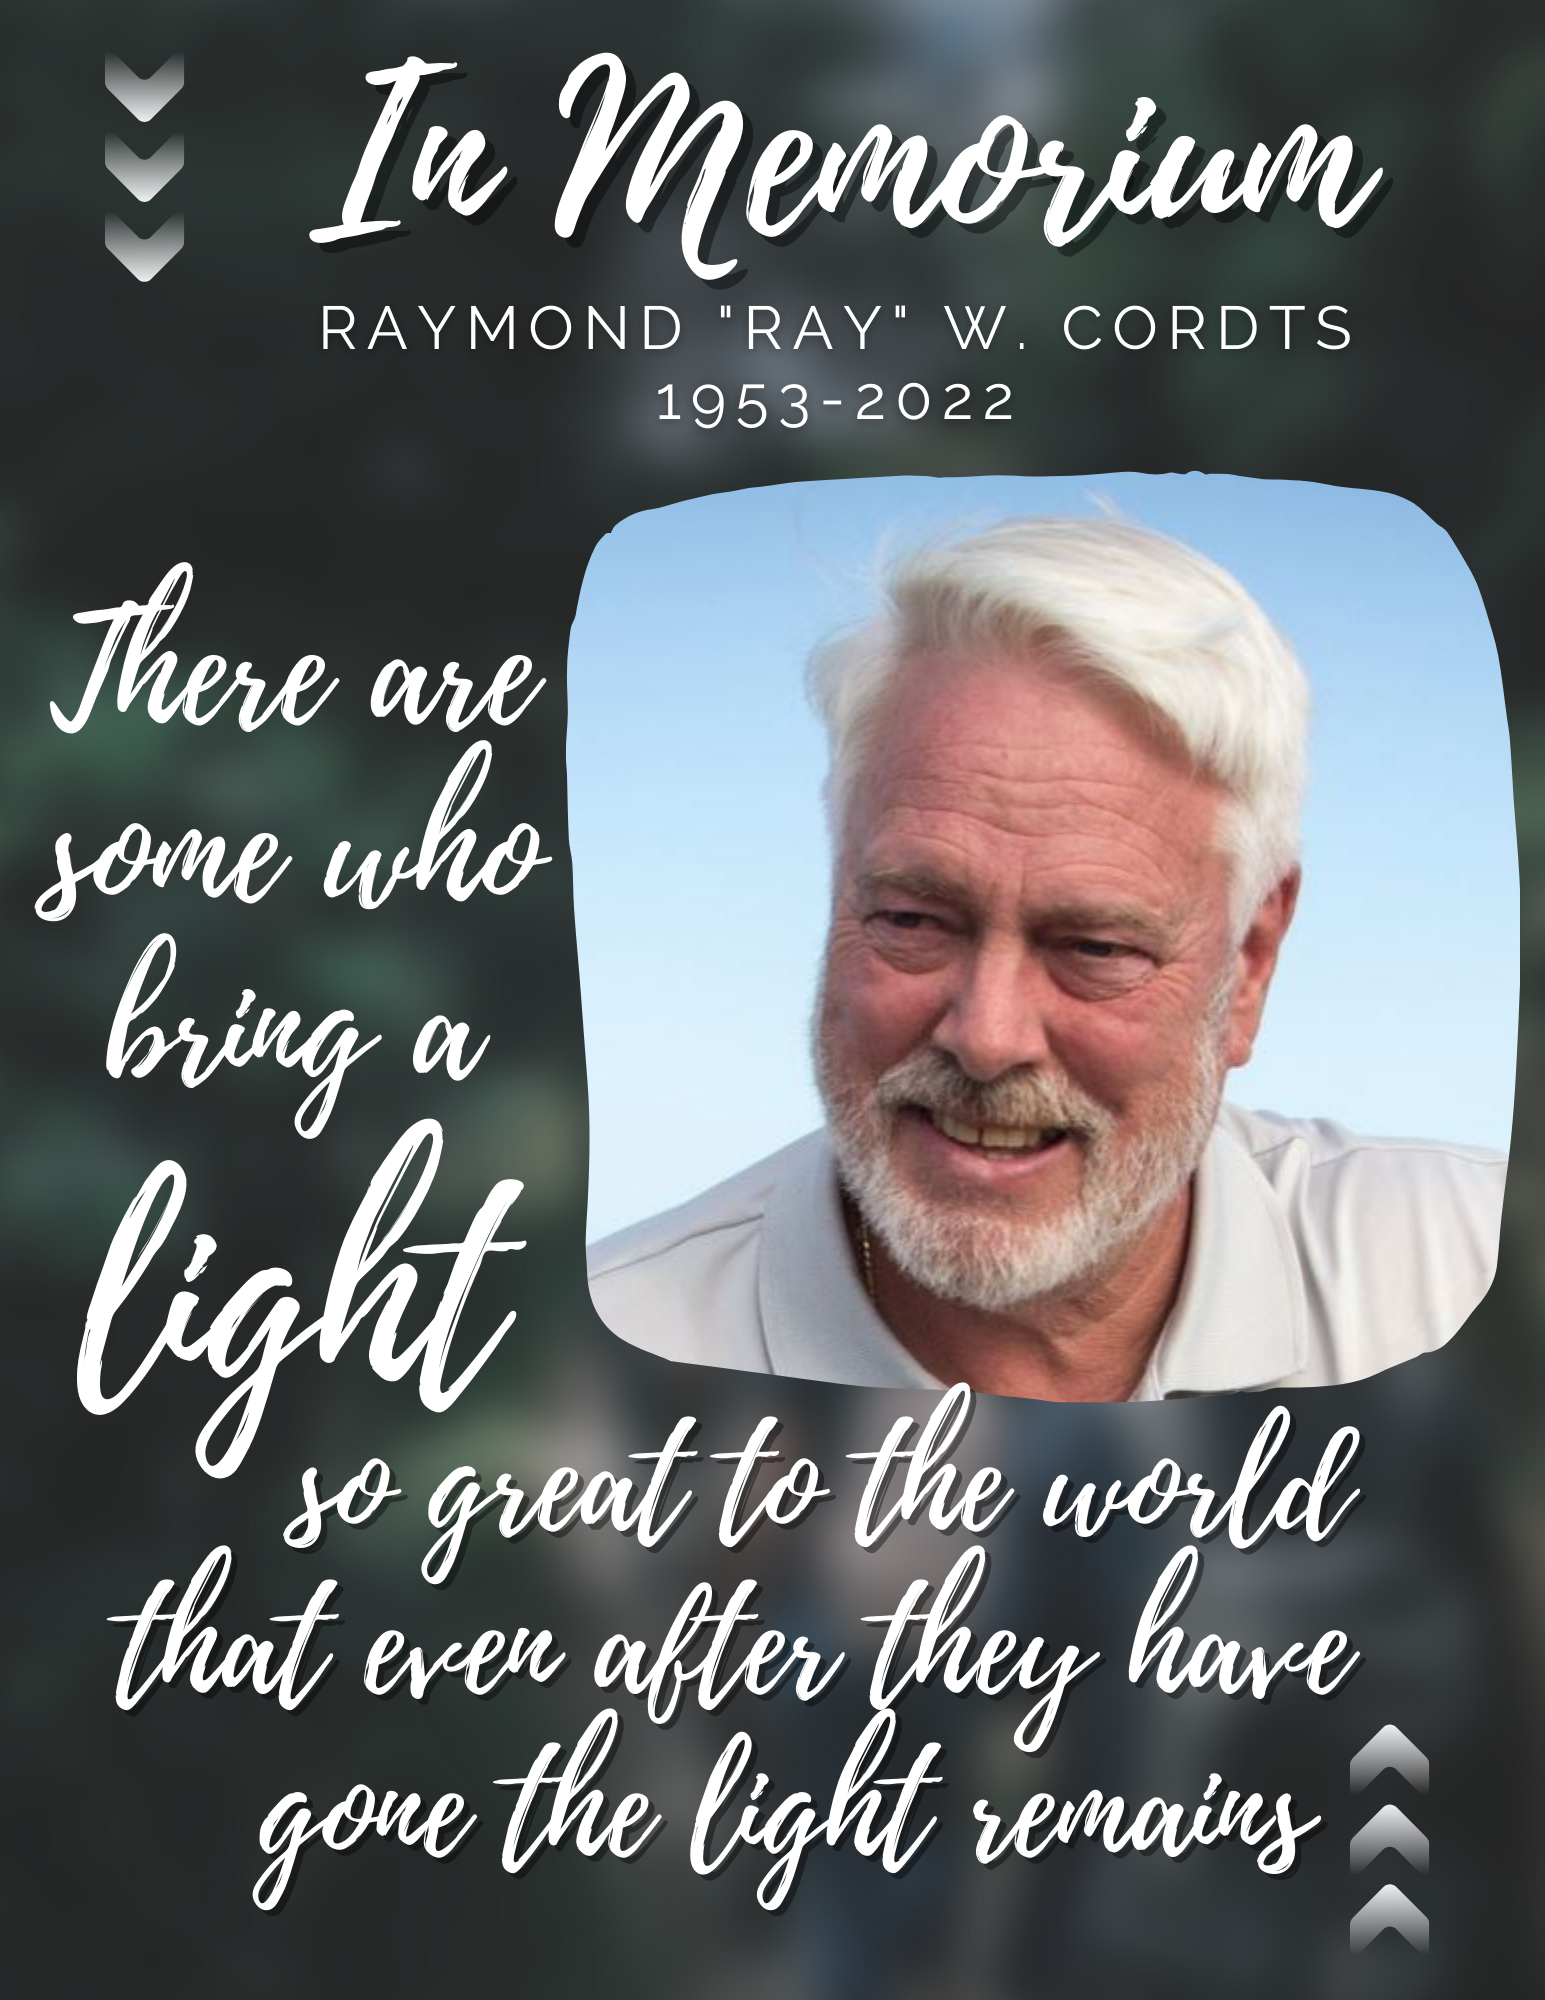 In Memorium - Raymond "Ray" W. Cordts, 1953 - 2022. There are some who bring a light so great to the world that even after they have gone the light remins